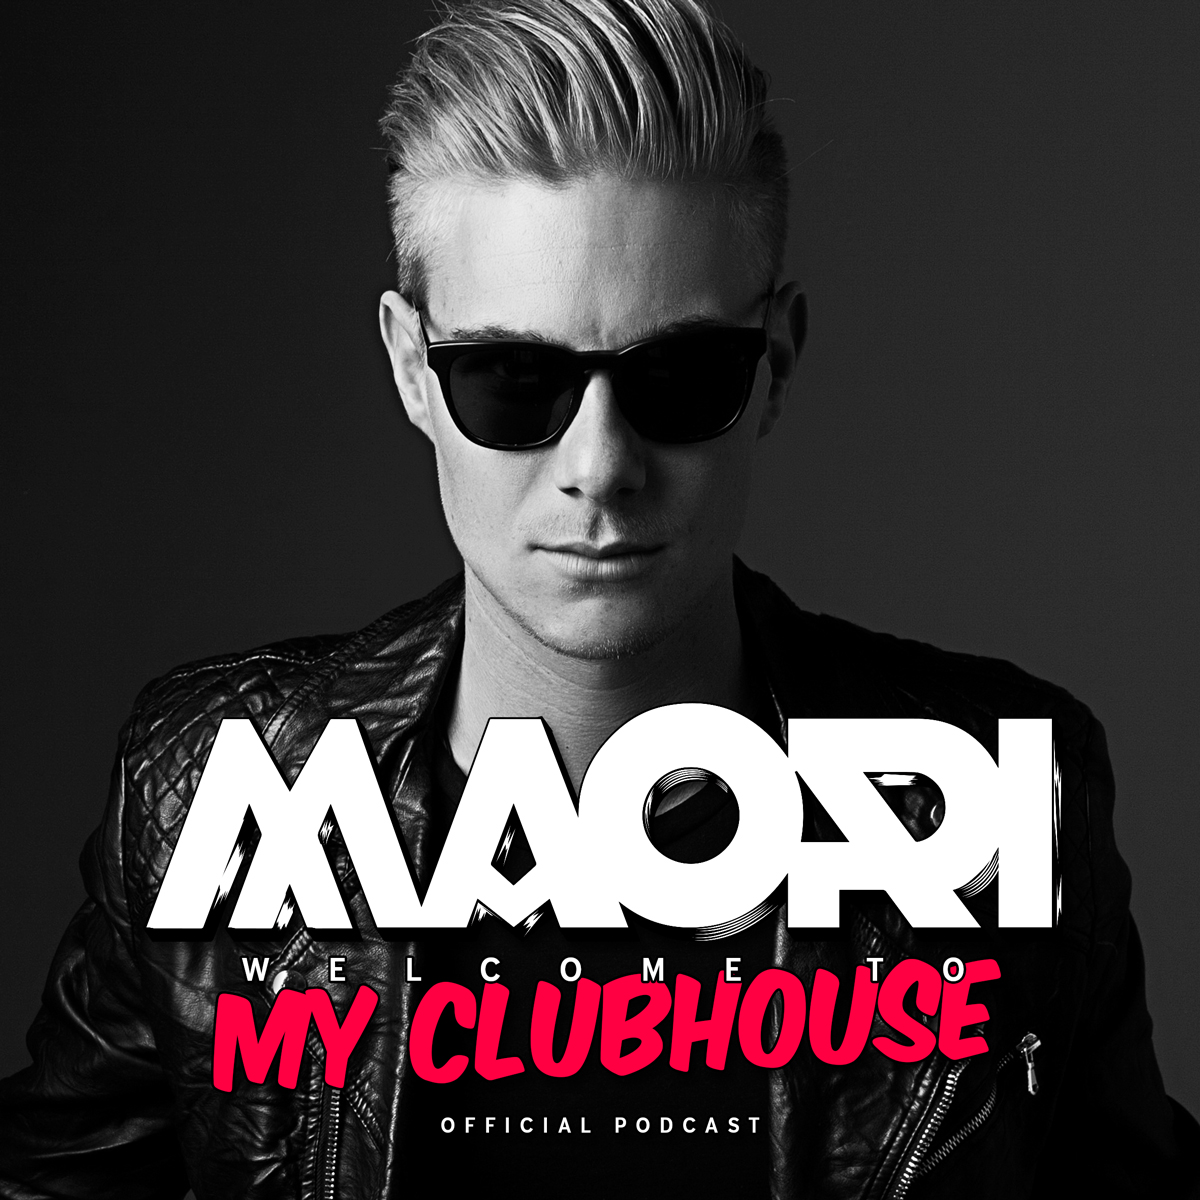 My Clubhouse by Maori - Podcast #042